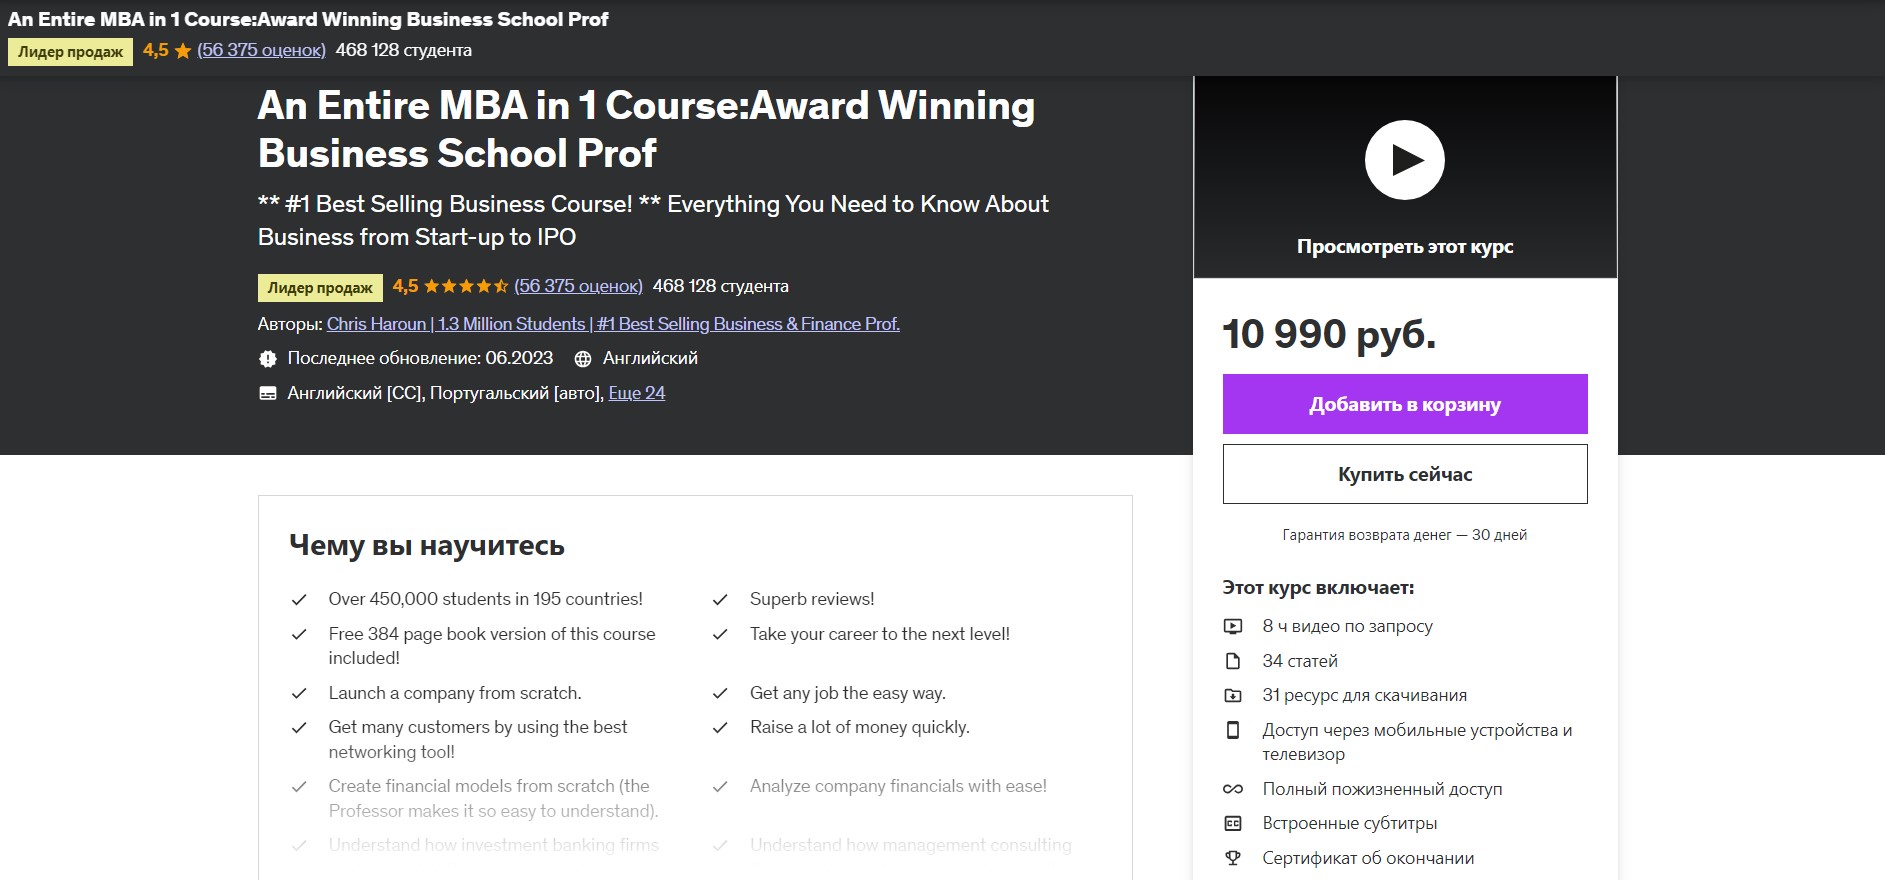 An EntireMBA in 1 Course от Udemy 